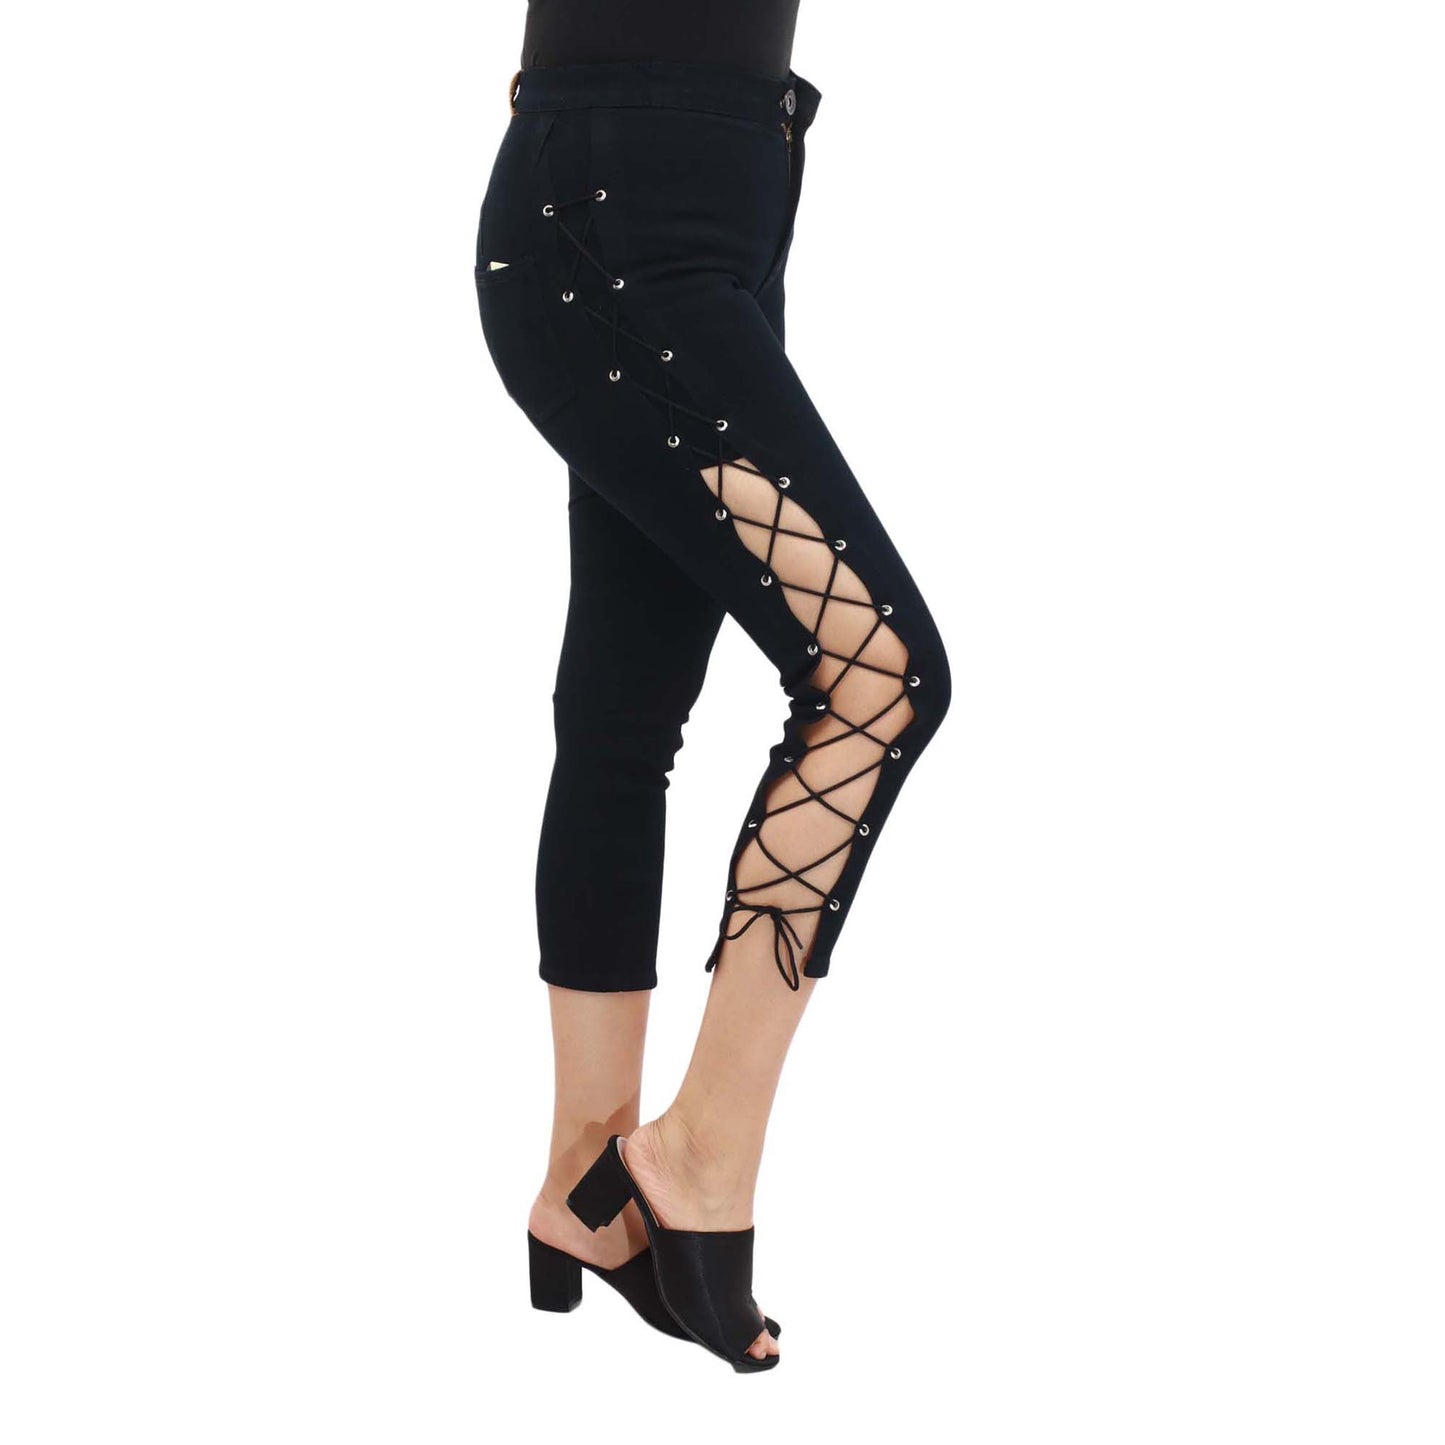 Black jeans skinny pant with lace design